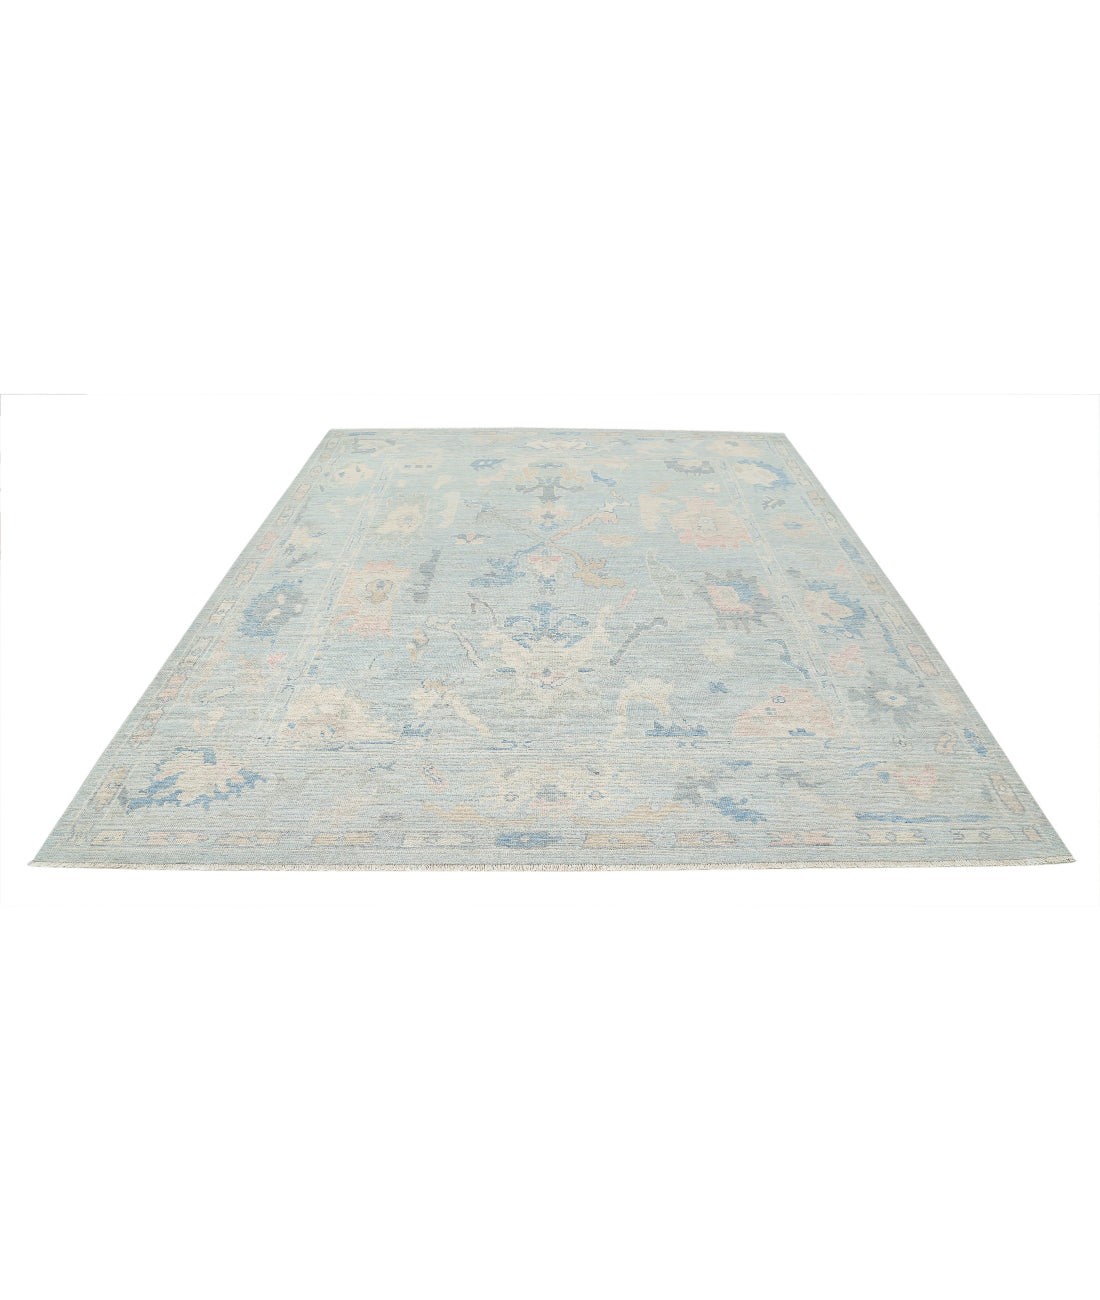 Hand Knotted Oushak Wool Rug - 8'4'' x 10'1'' 8'4'' x 10'1'' (250 X 303) / Blue / Ivory